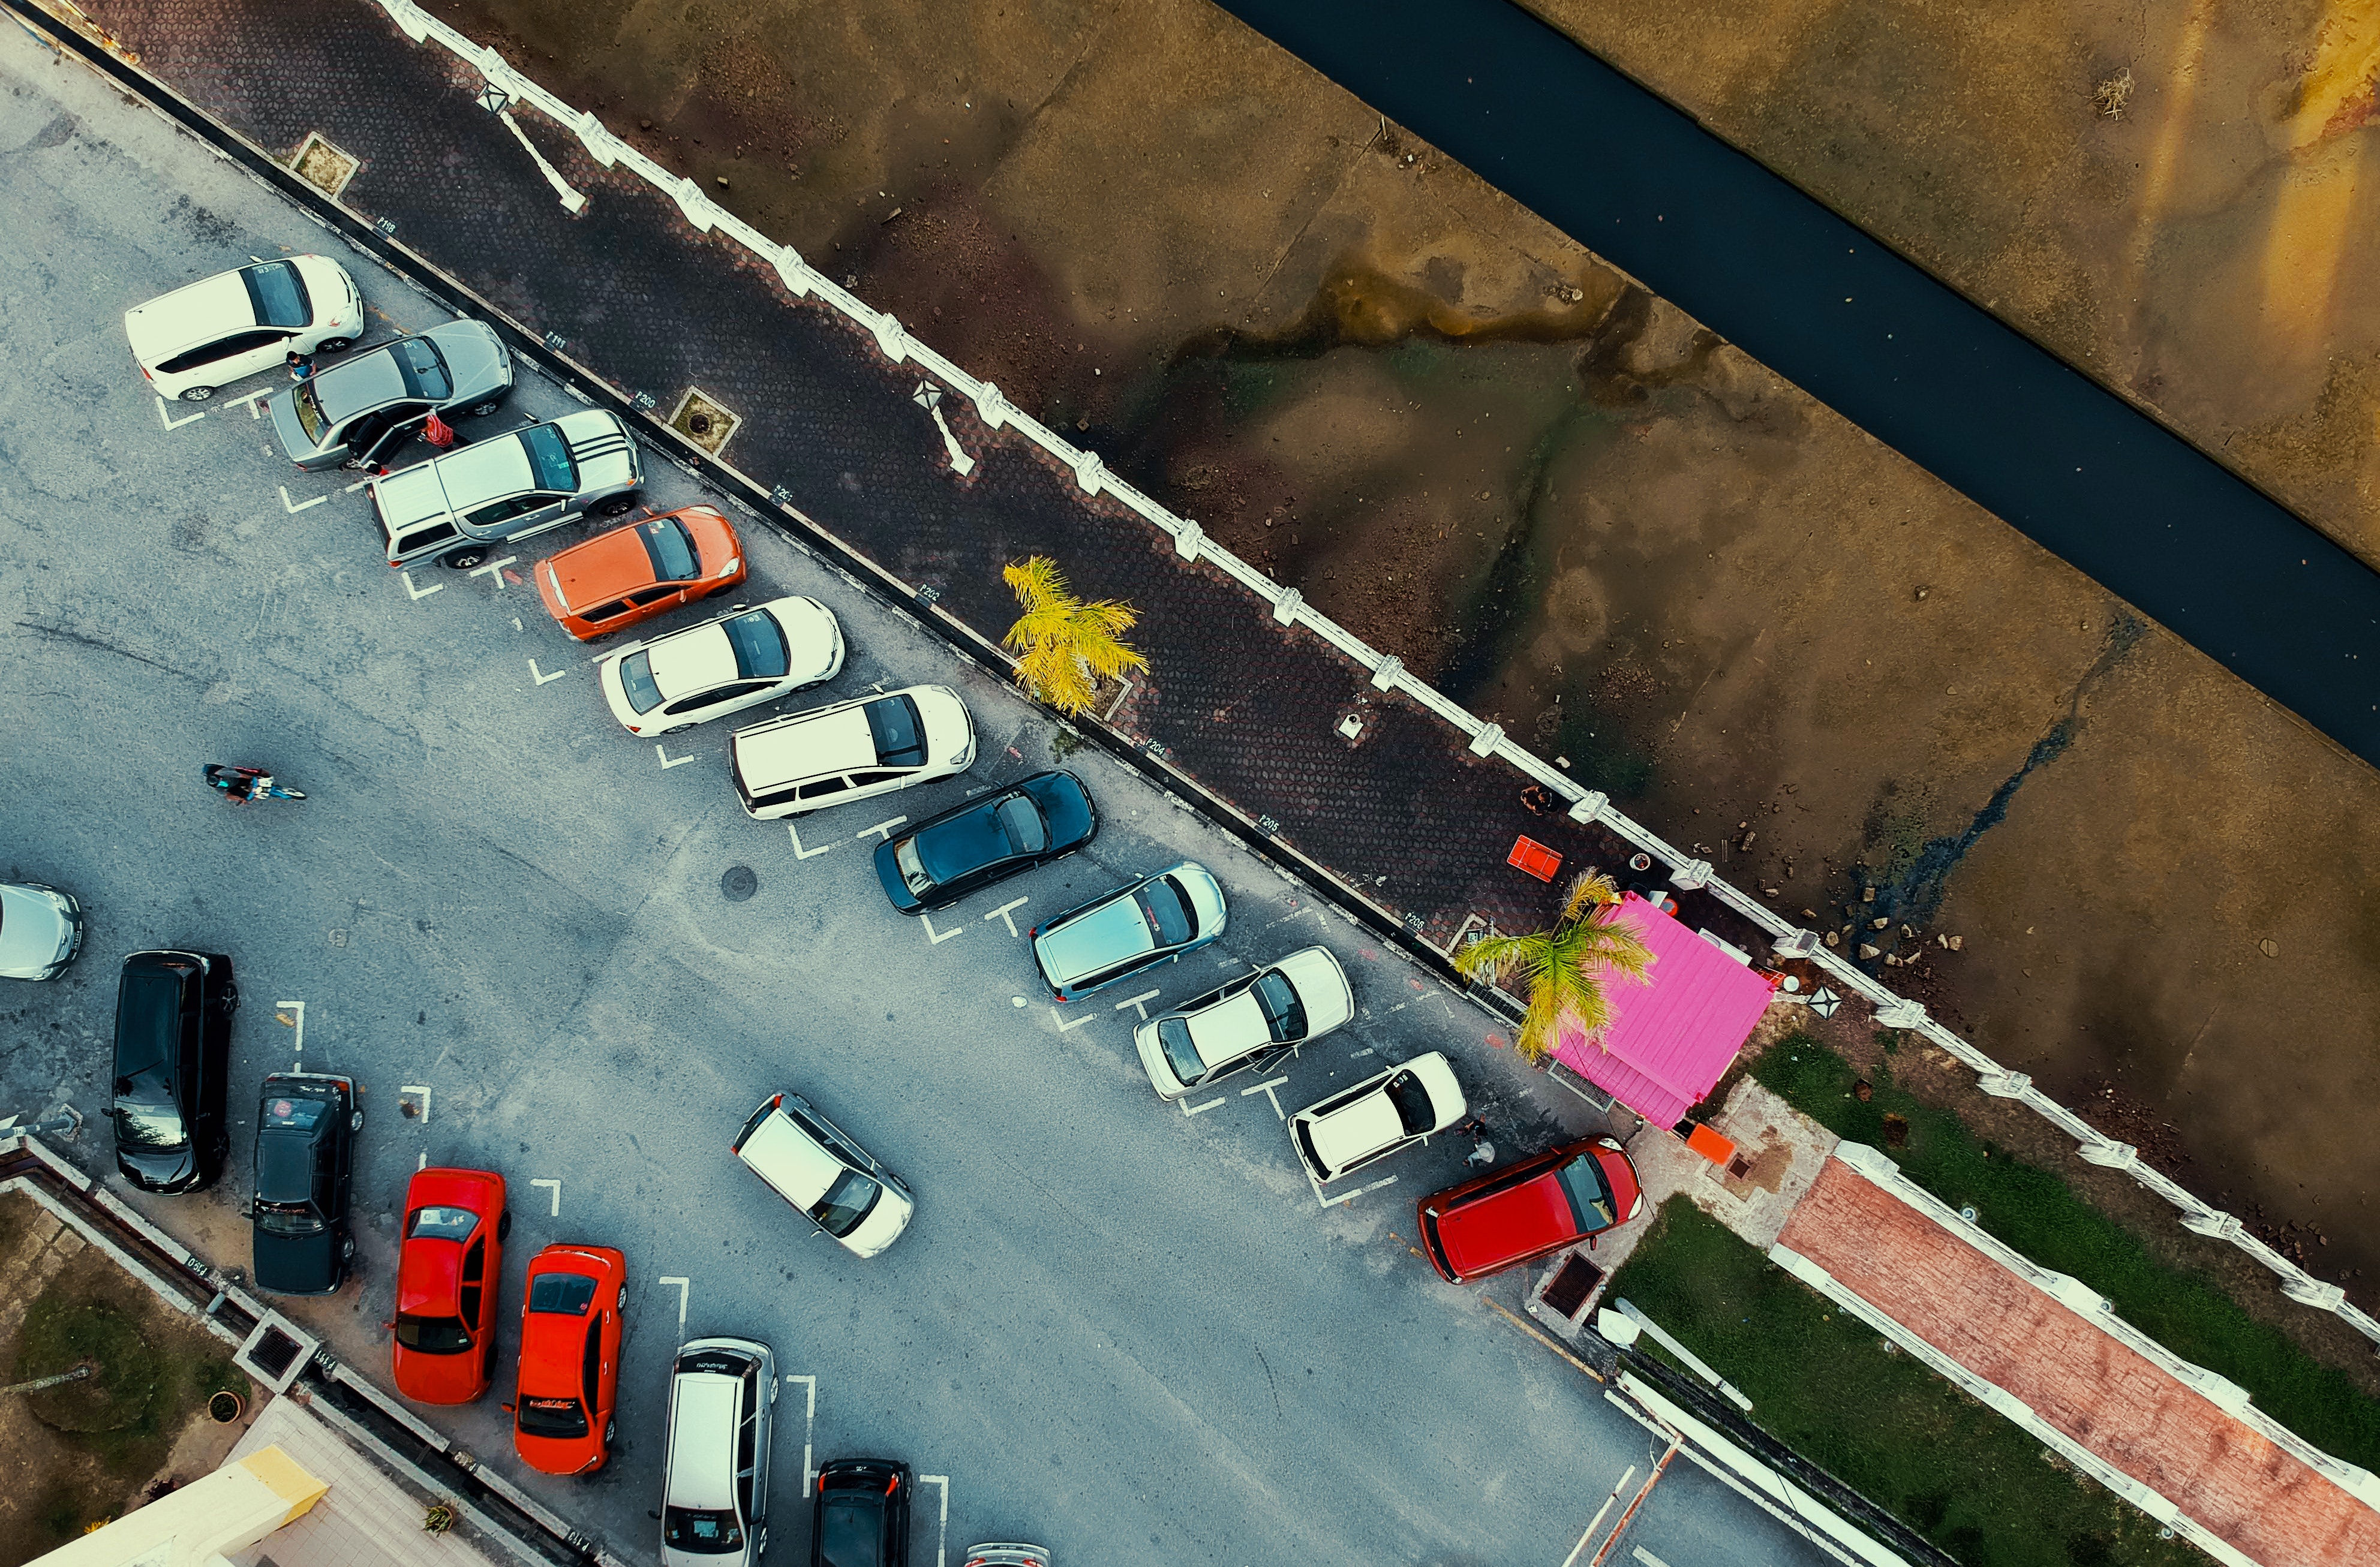 AVOID THE PERILS OF THE PARKING LOT